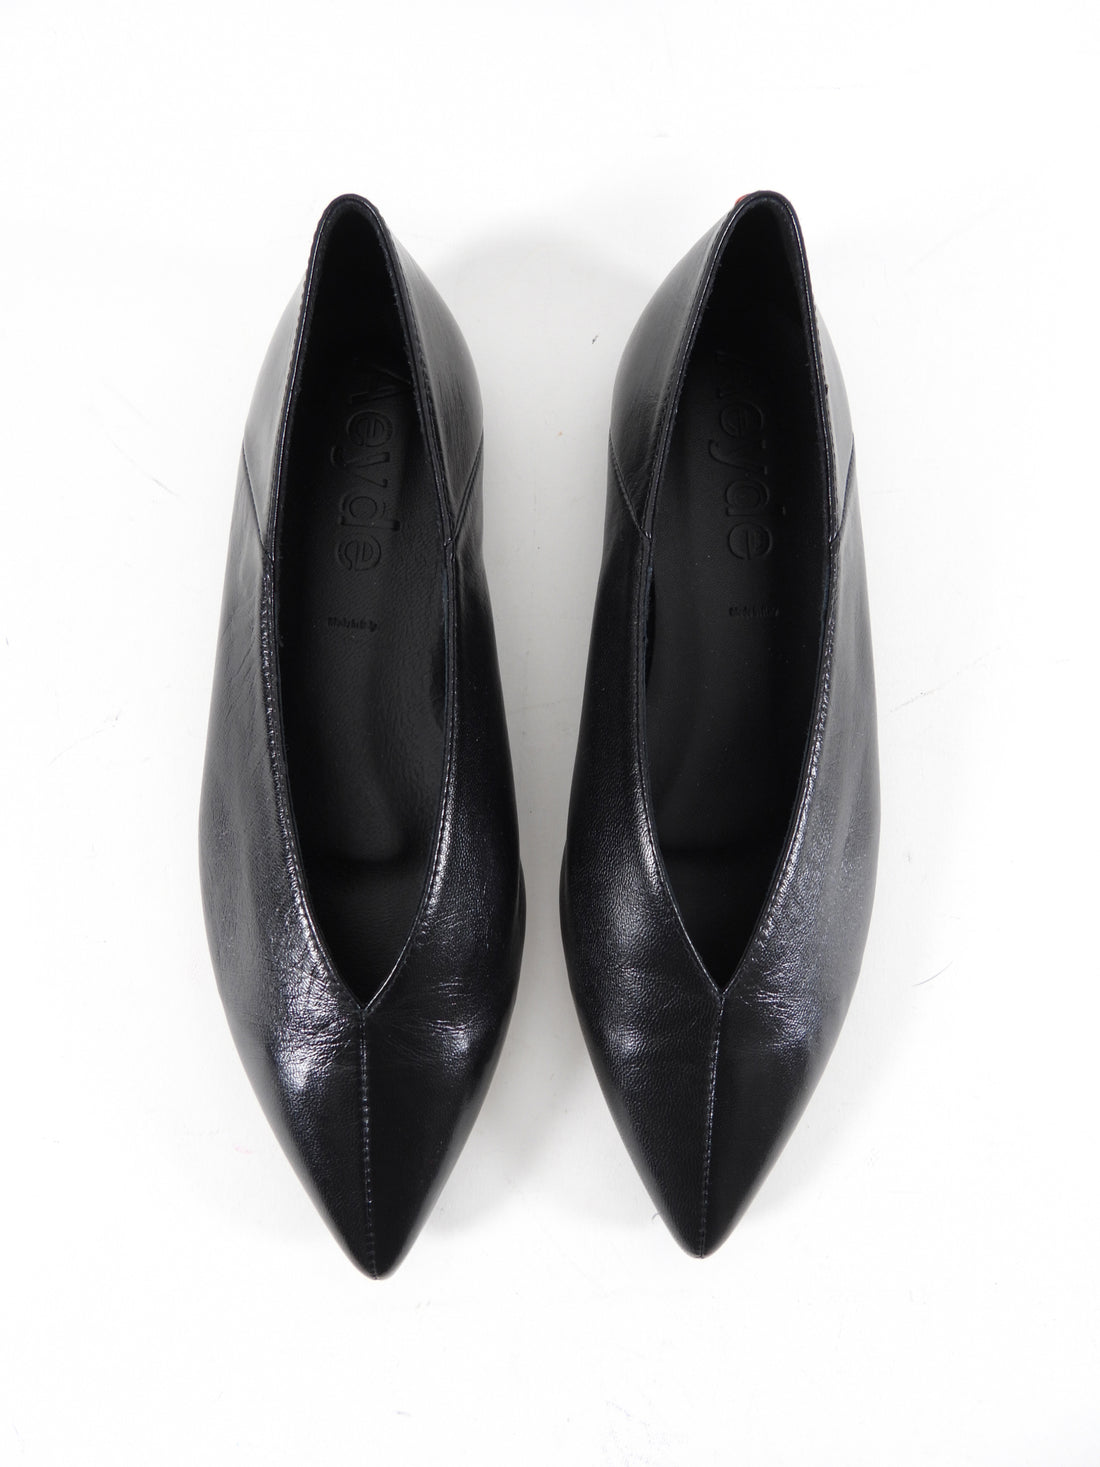 Aeyde Black Leather Moa Pointed Flat Shoes - 37